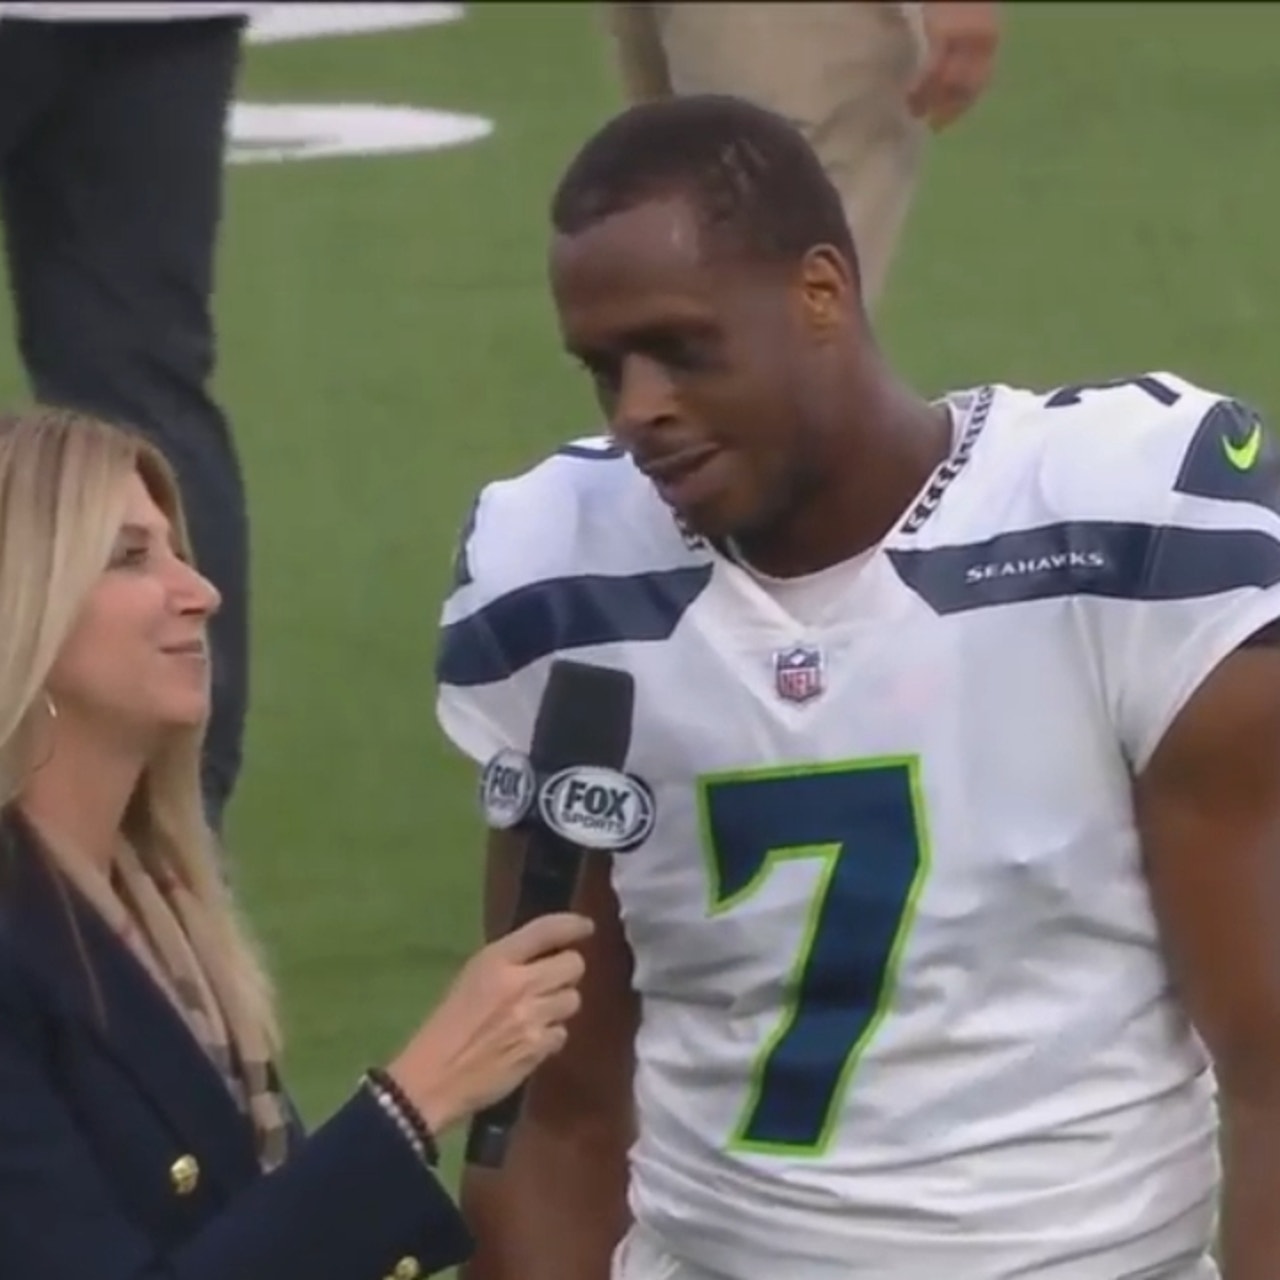 You can never count us out!' - Geno Smith talks Seahawks